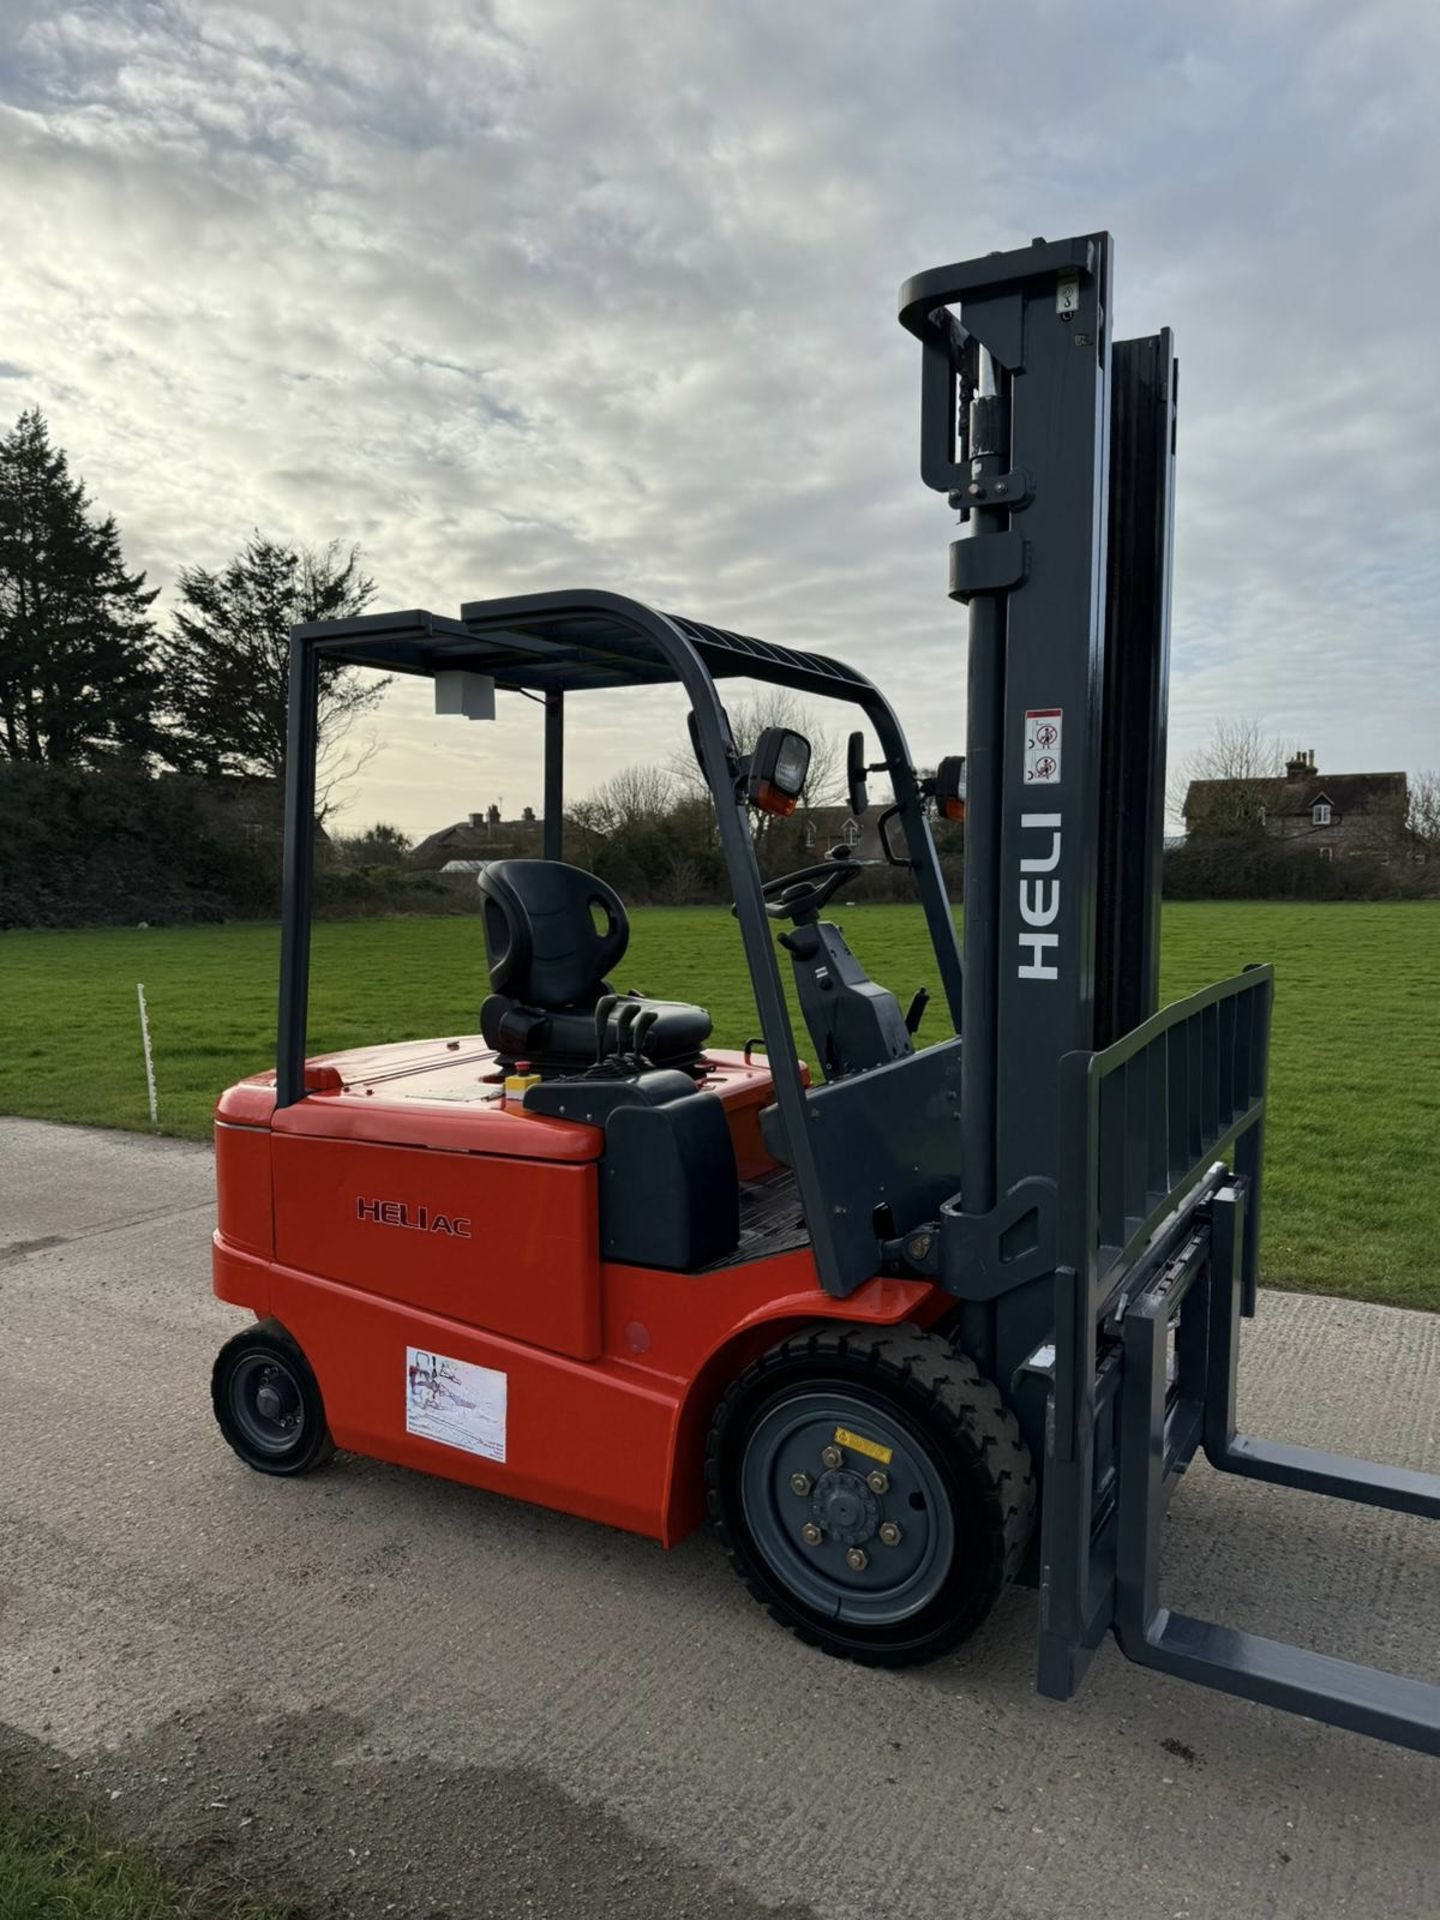 2013, HELI - 3.5 Tonne, Electric Forklift Truck - Image 7 of 8